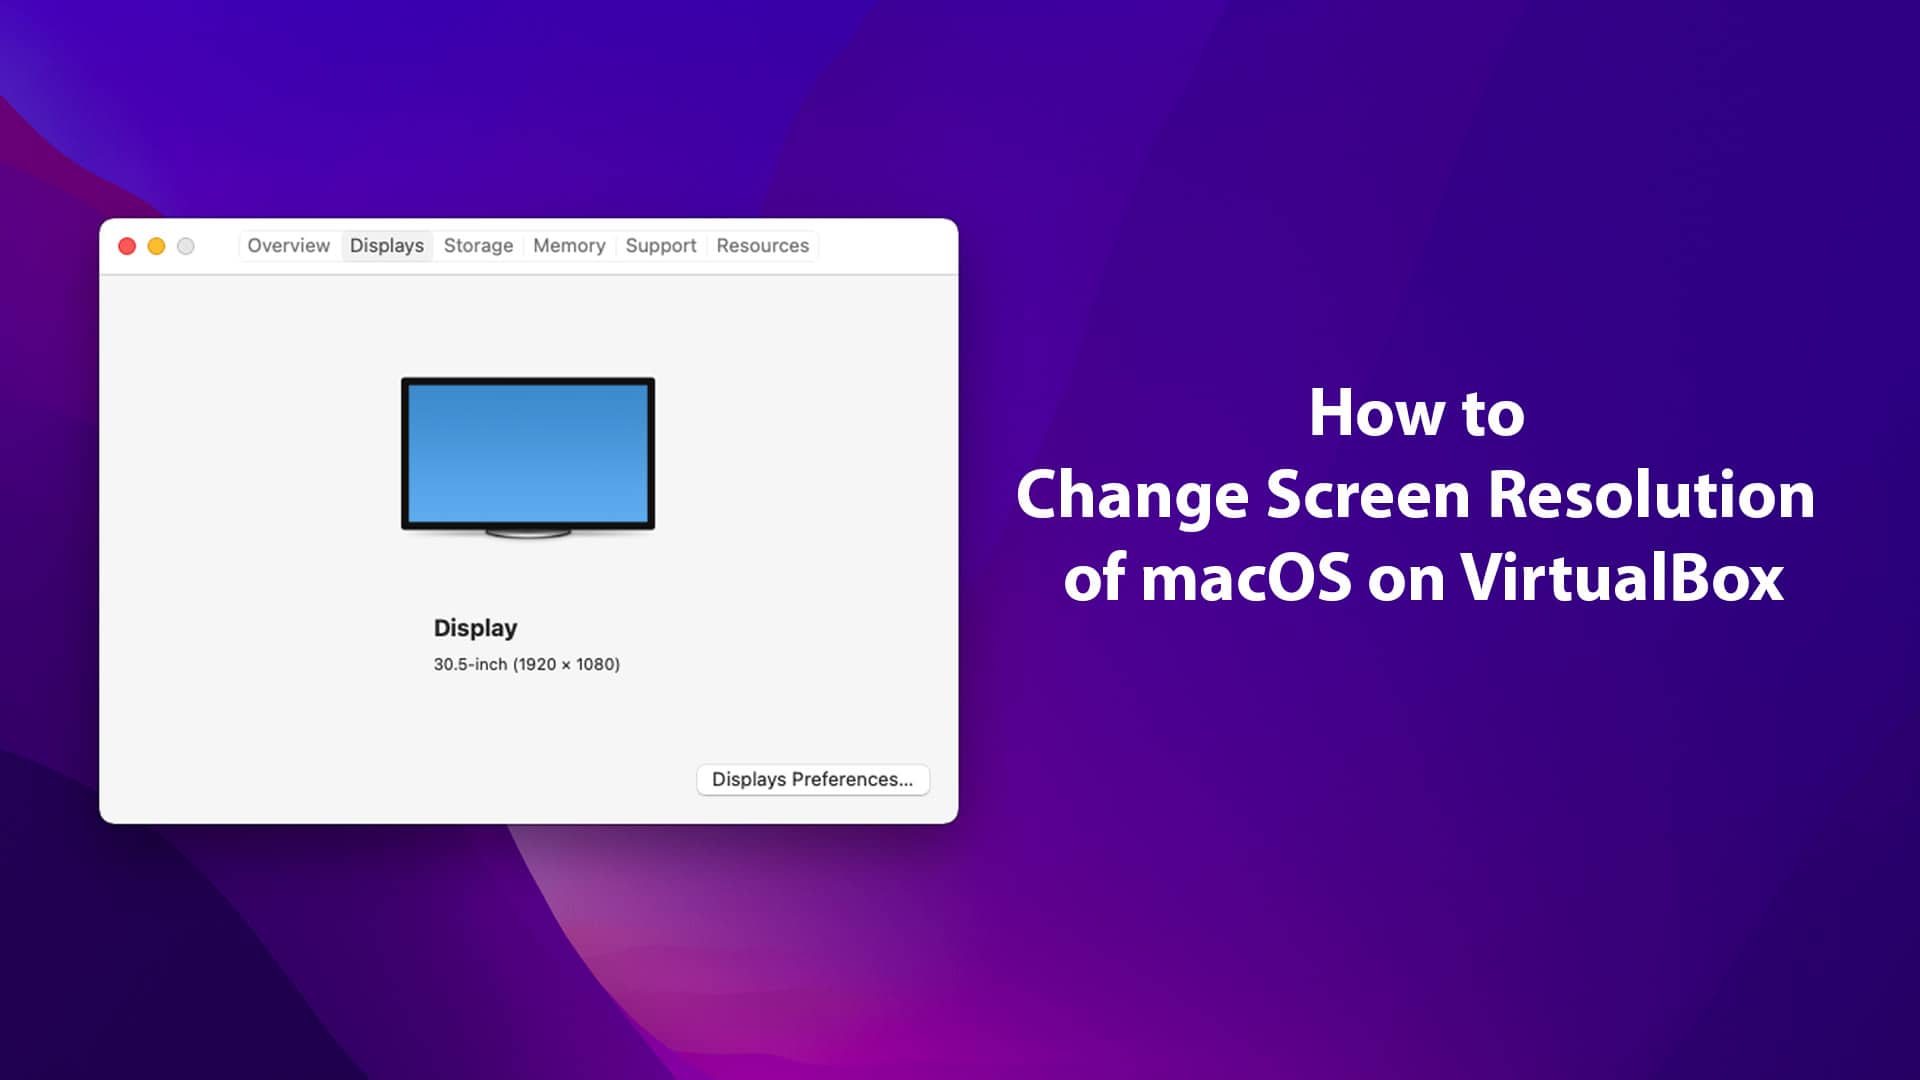 How to Change Screen Resolution of macOS on VirtualBox